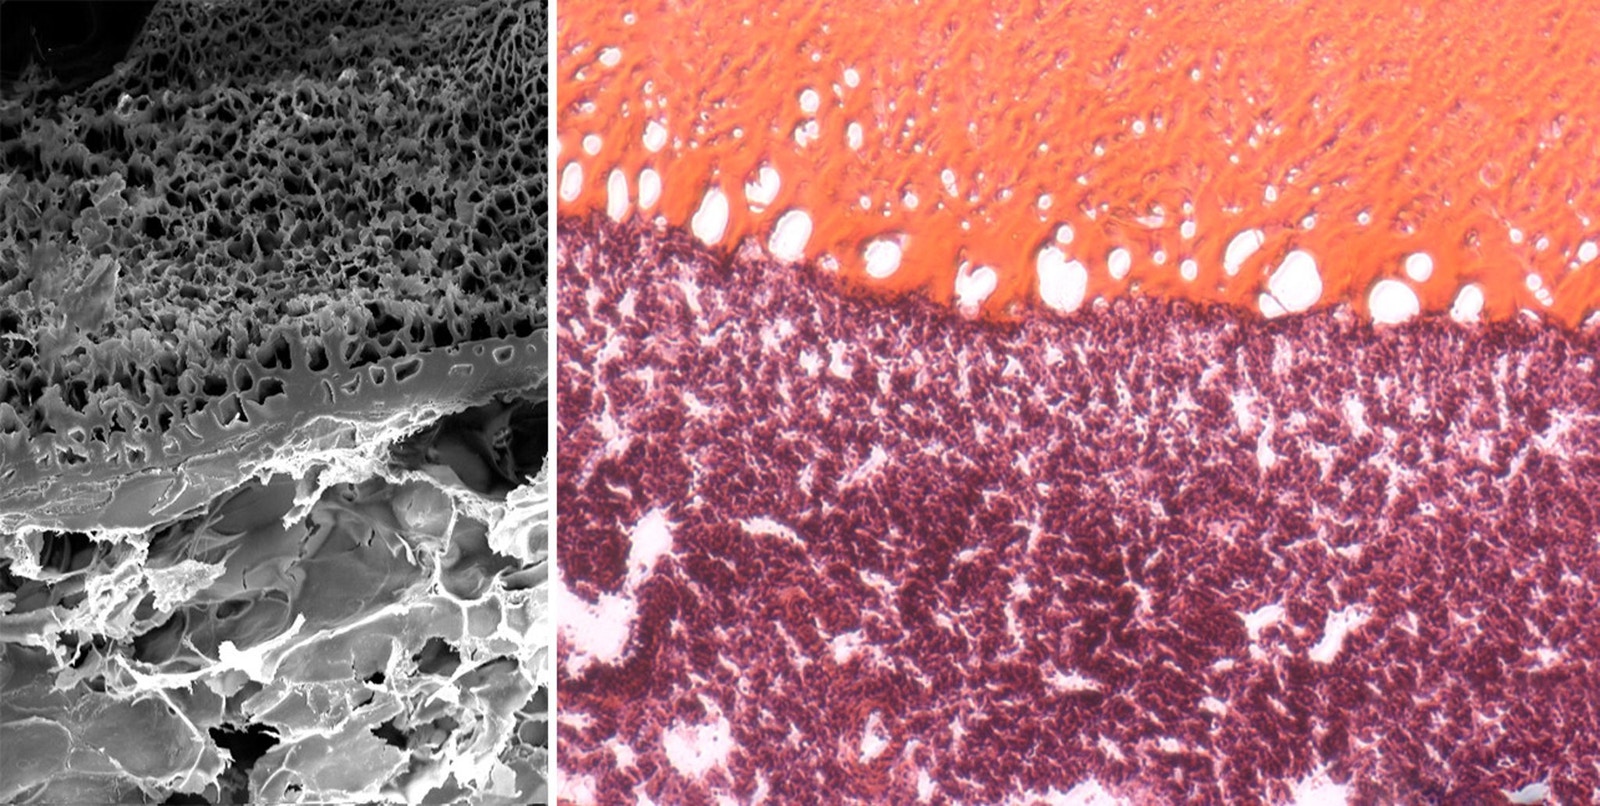 both showing how MeTro gel (on top), applied to an injured lung area, bonds and interlocks with the tissue surface. The elastic tissue is tightly sealed without the need for additional sutures or staples. Credit: Wyss Institute at Harvard University